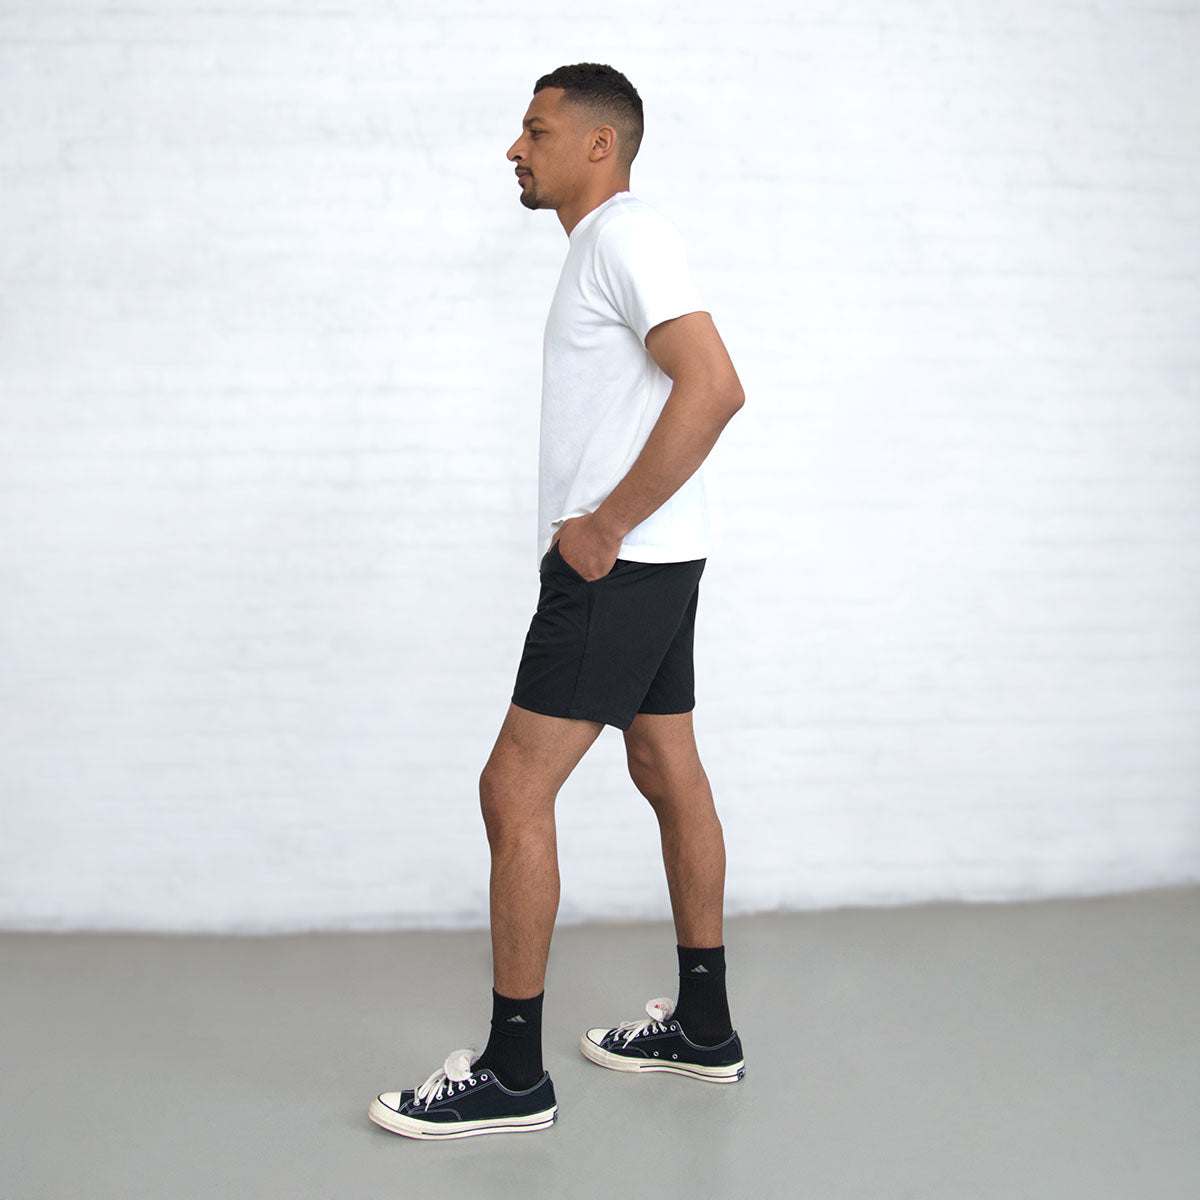 Tailored Technical Shorts - Black